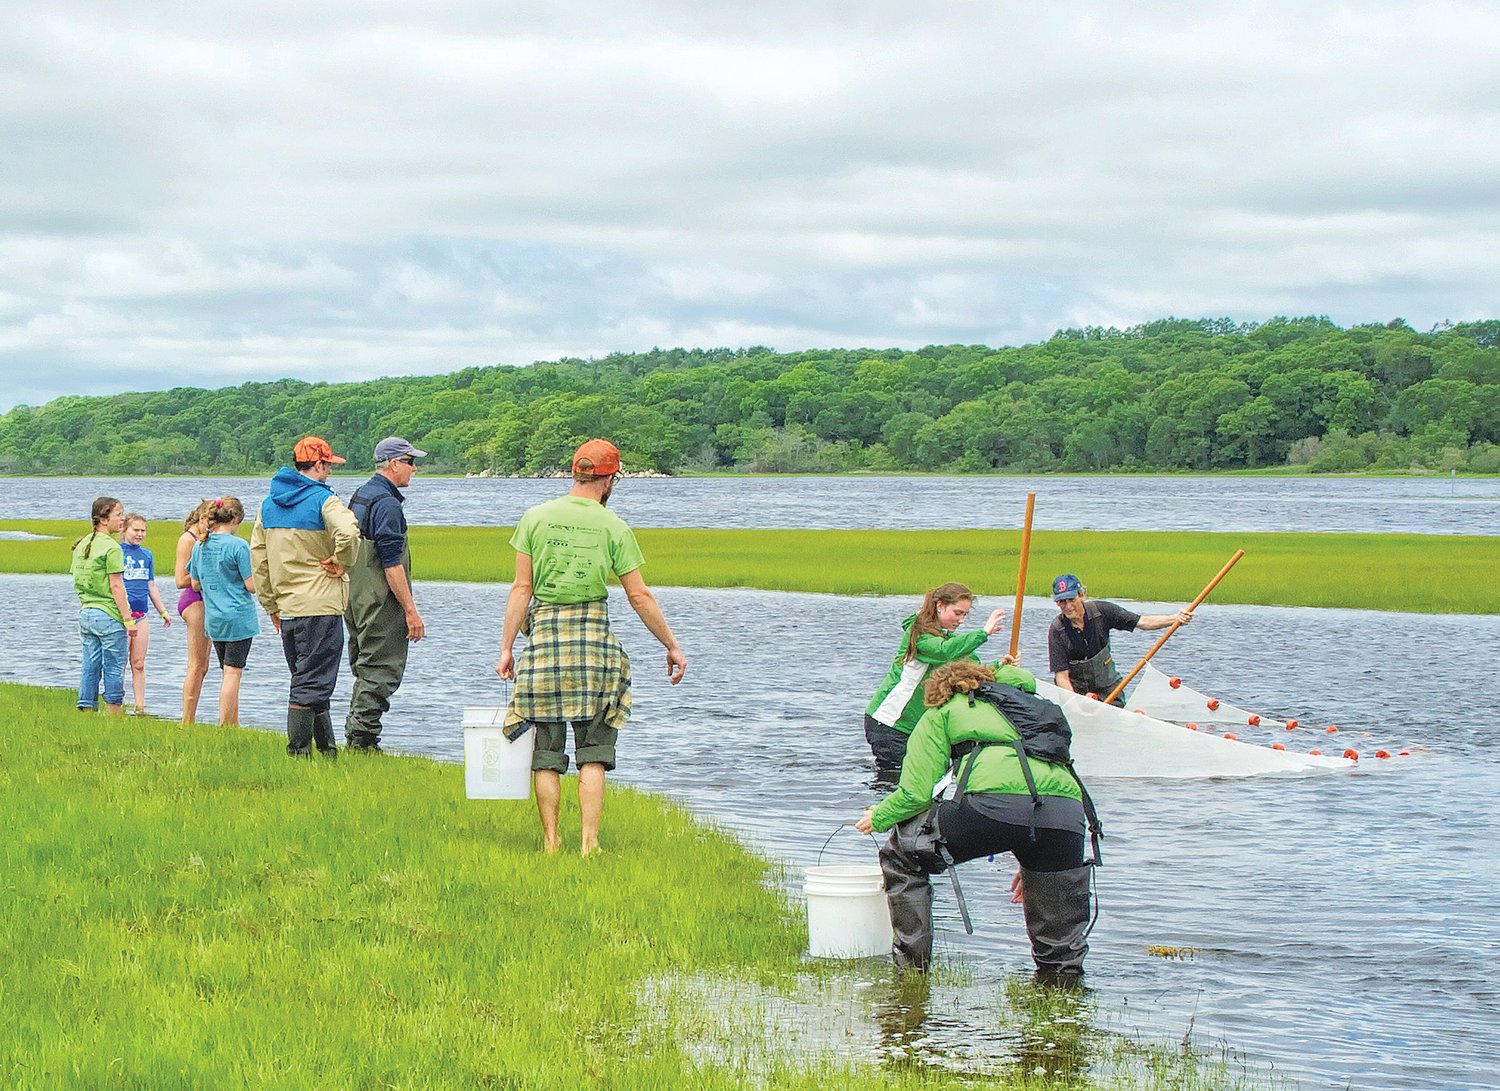 The marine team raced the tide to count biodiversity in Narrow River during the 2013 BioBlitz in Narragansett.